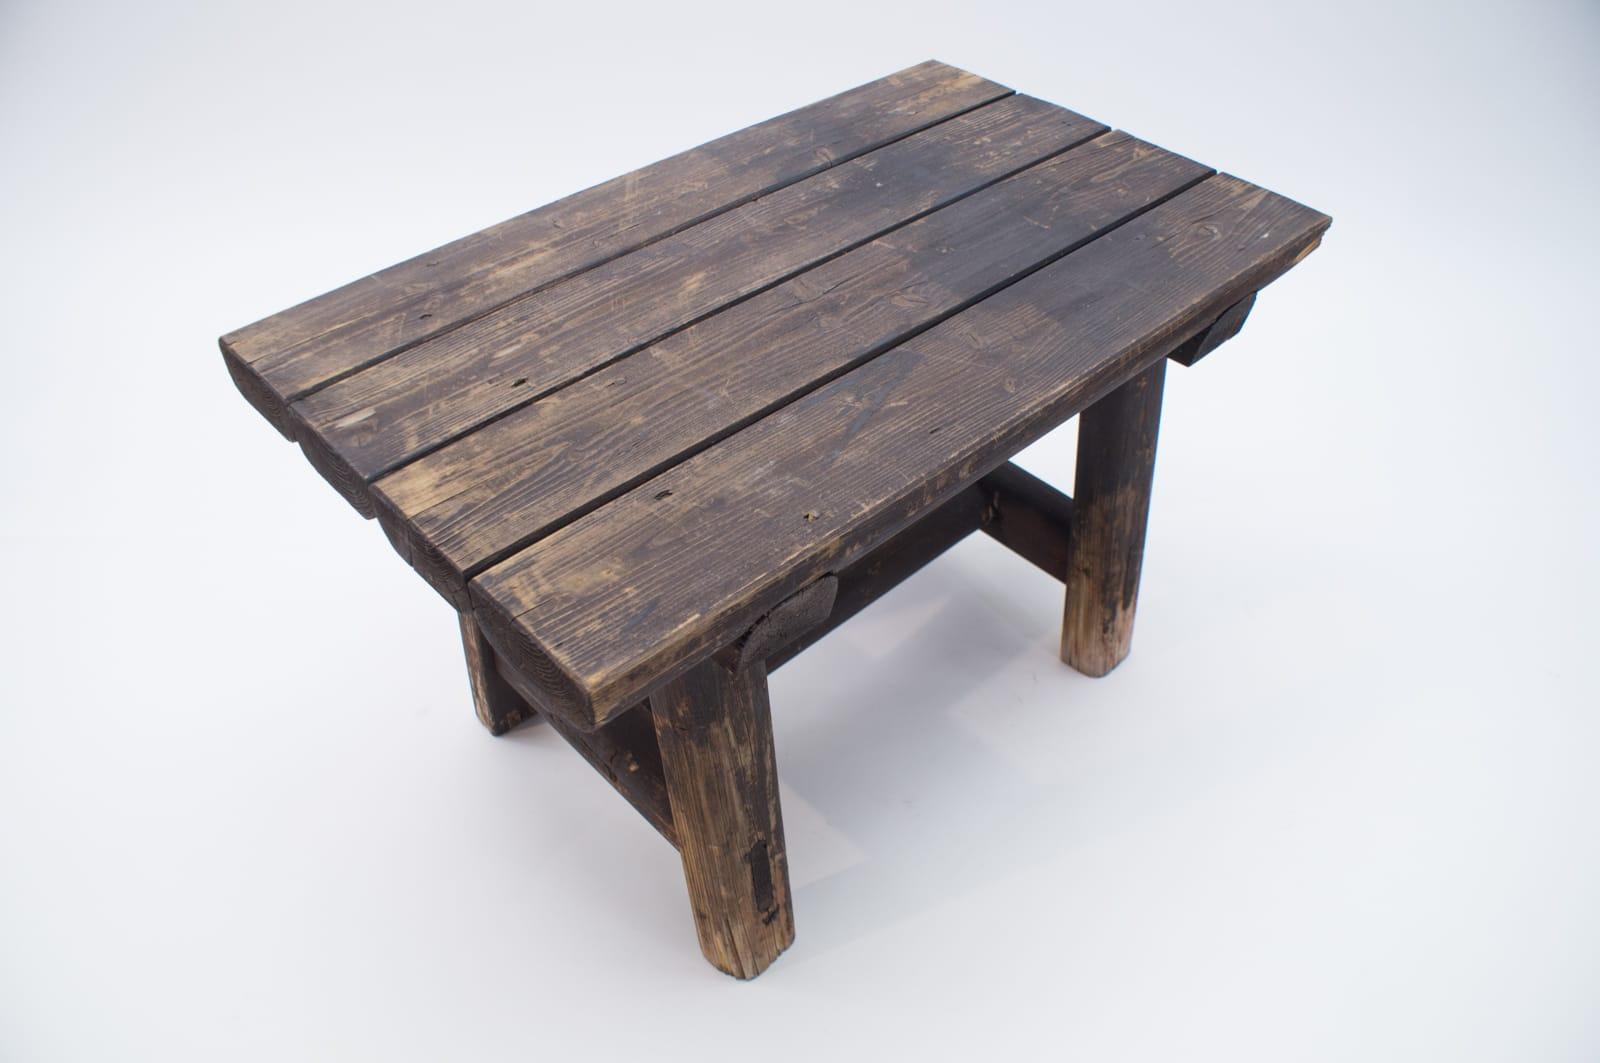 Black Forest Wooden Bench, 1930s-1940s Germany 8